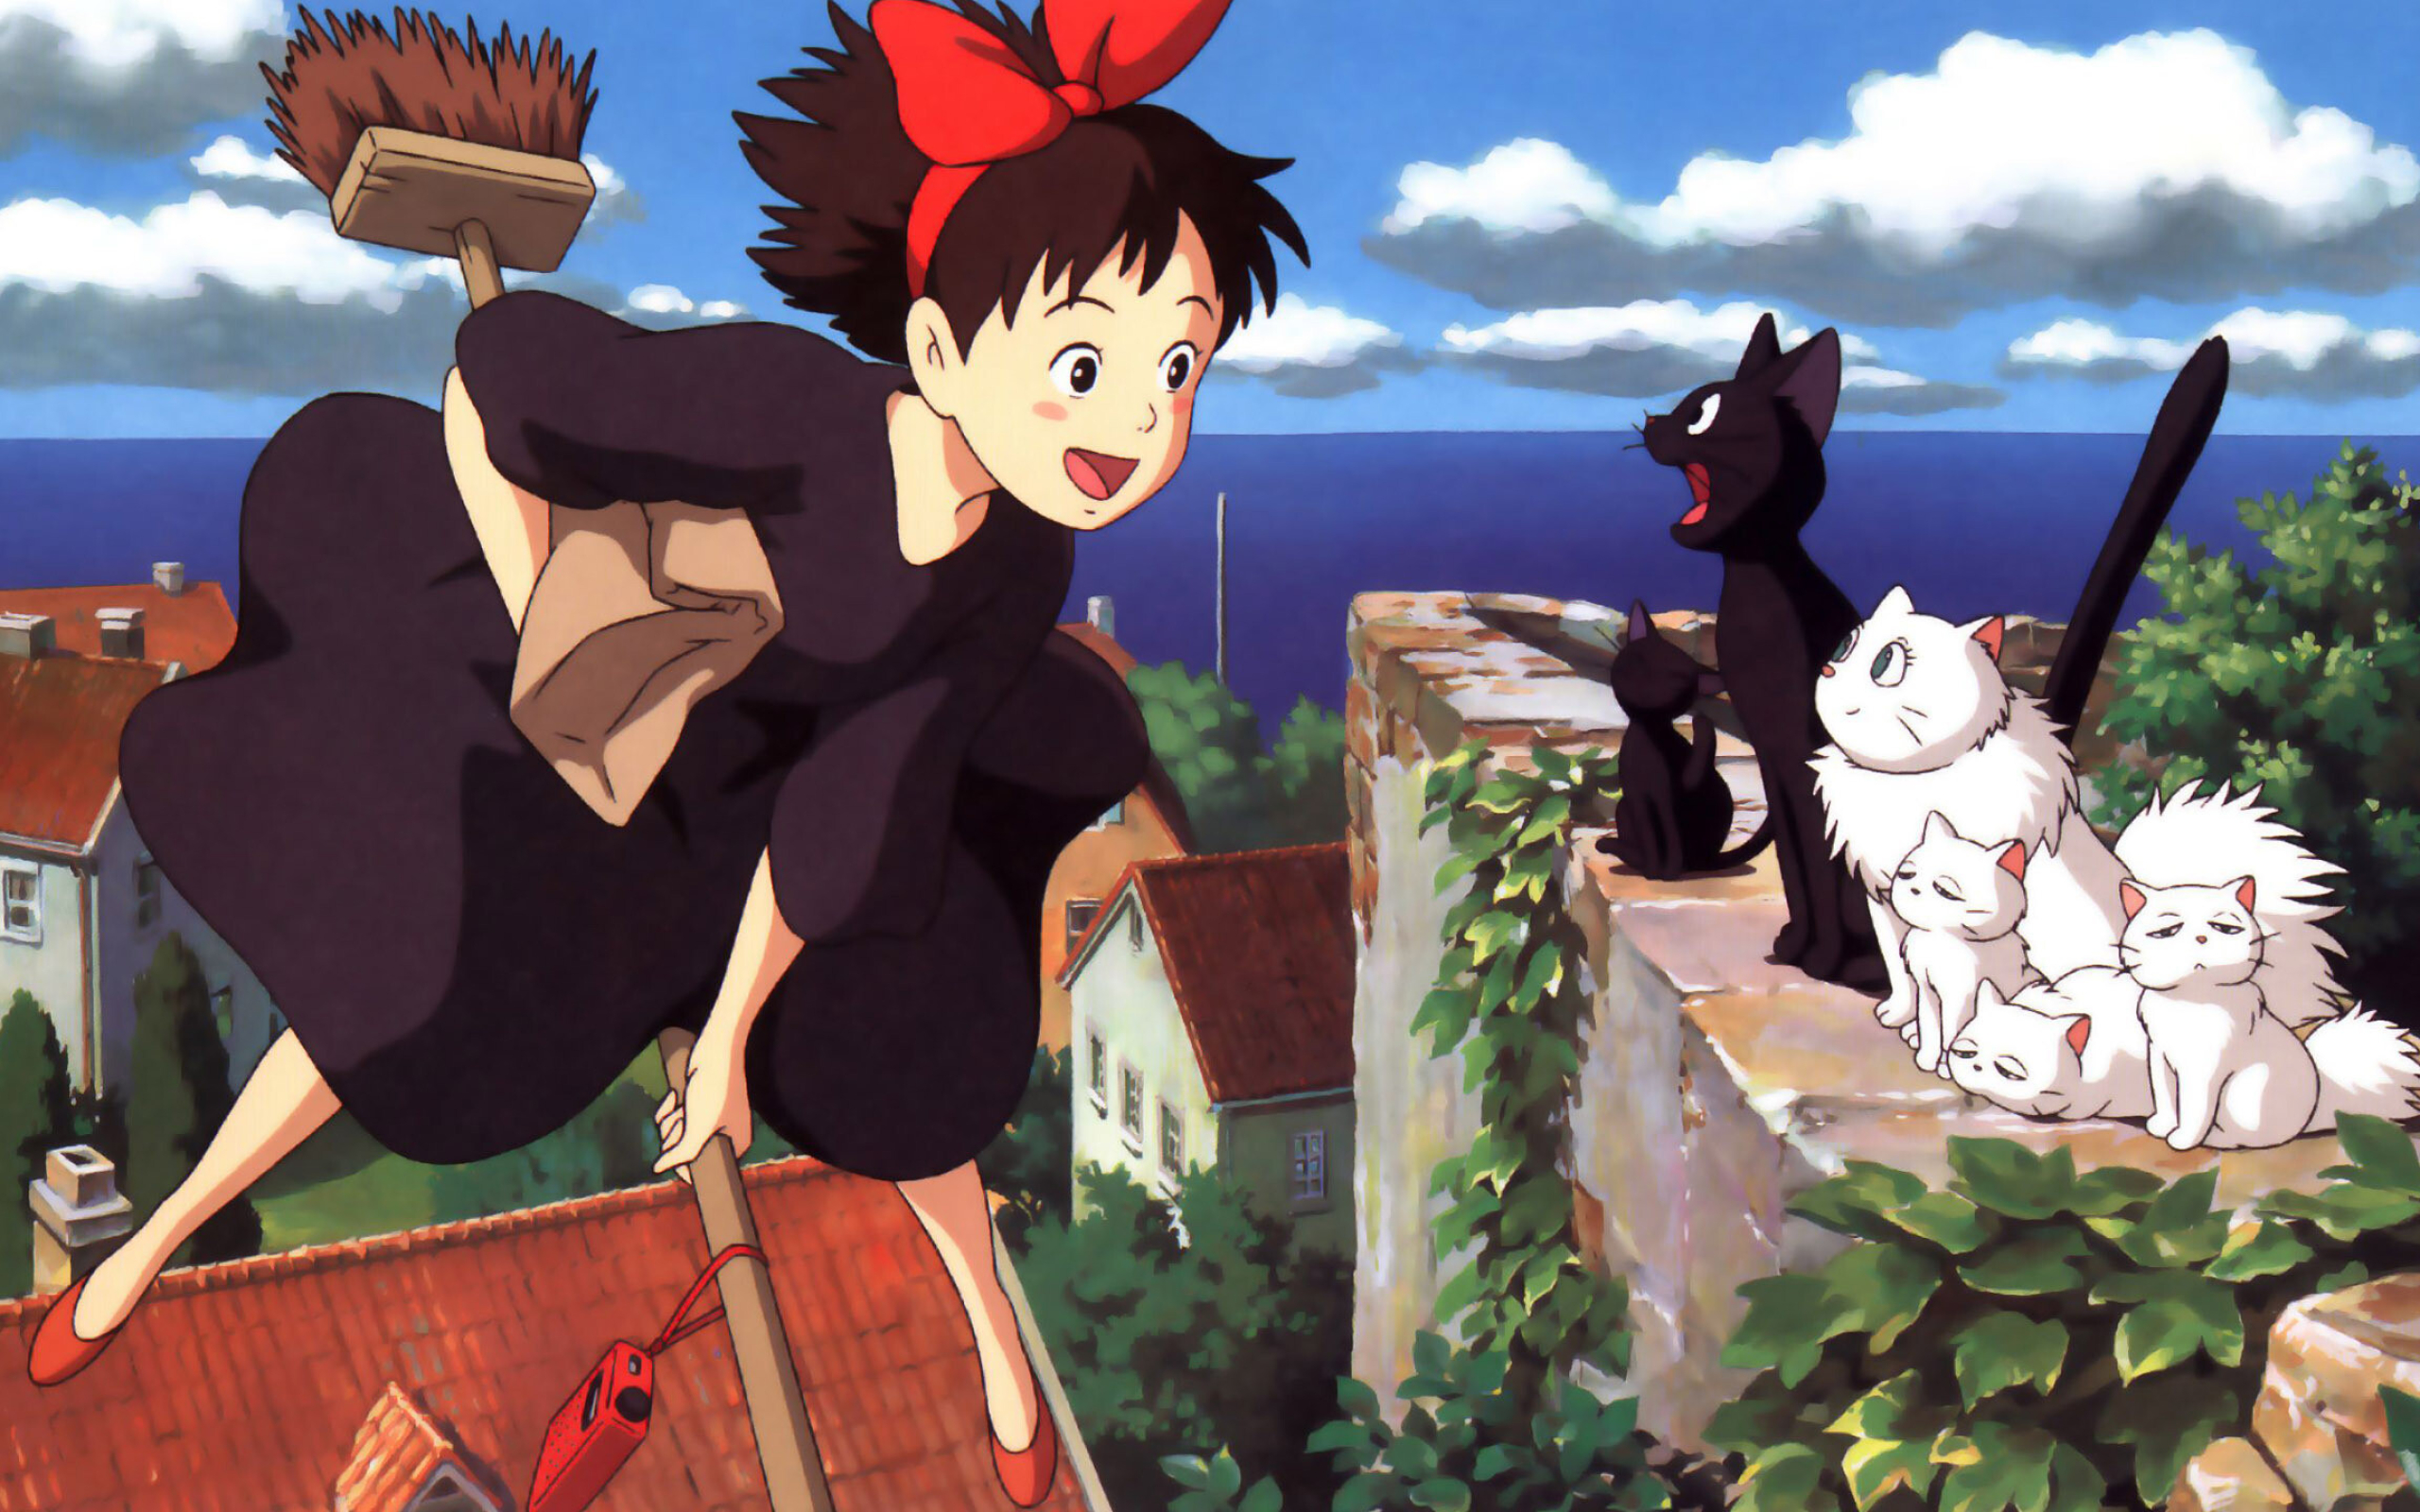 Kiki's Delivery Service: Kiki, a young 13-year-old witch who lives in a village where her mother is the resident herbalist. 2560x1600 HD Background.